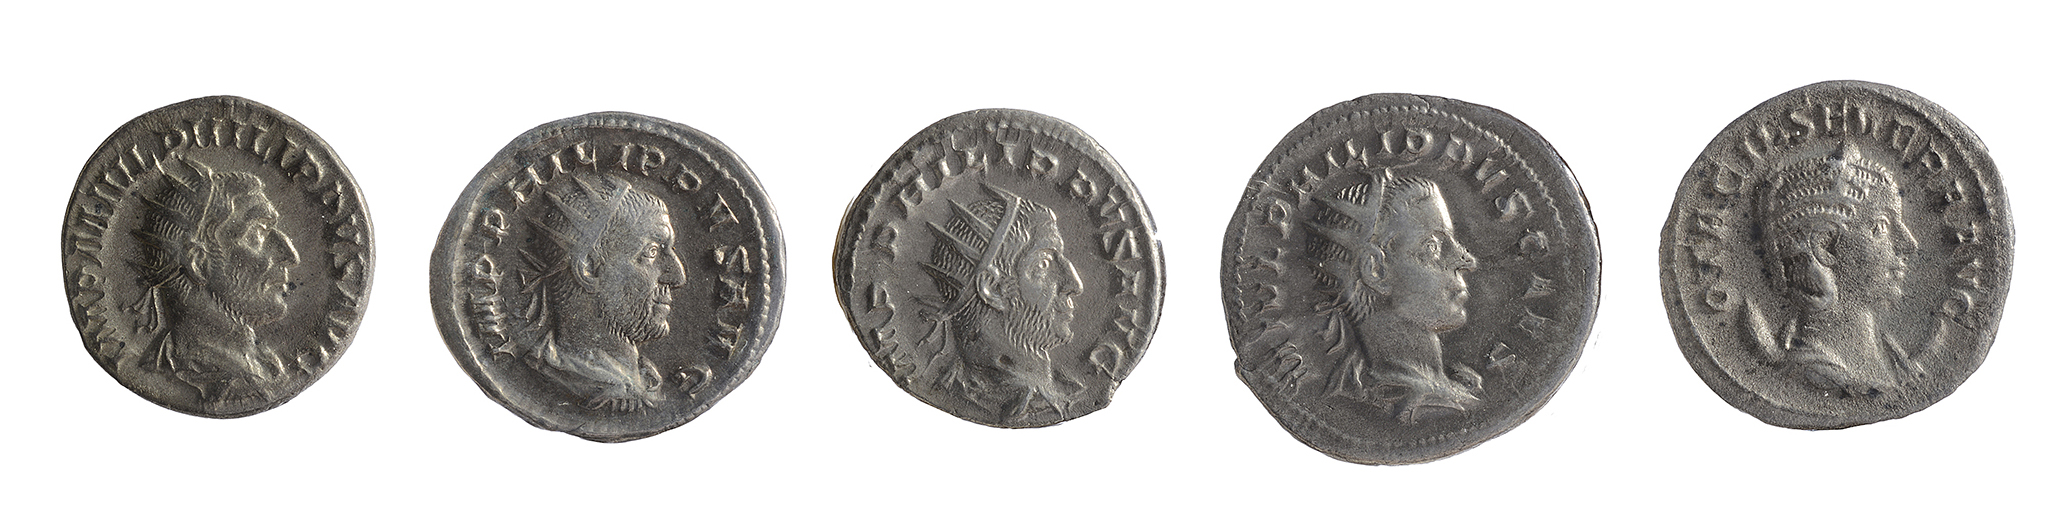 Five mid 3rd century AD Imperial Roman silver and silvered Antoninianii first Rome, 244-249 AD,